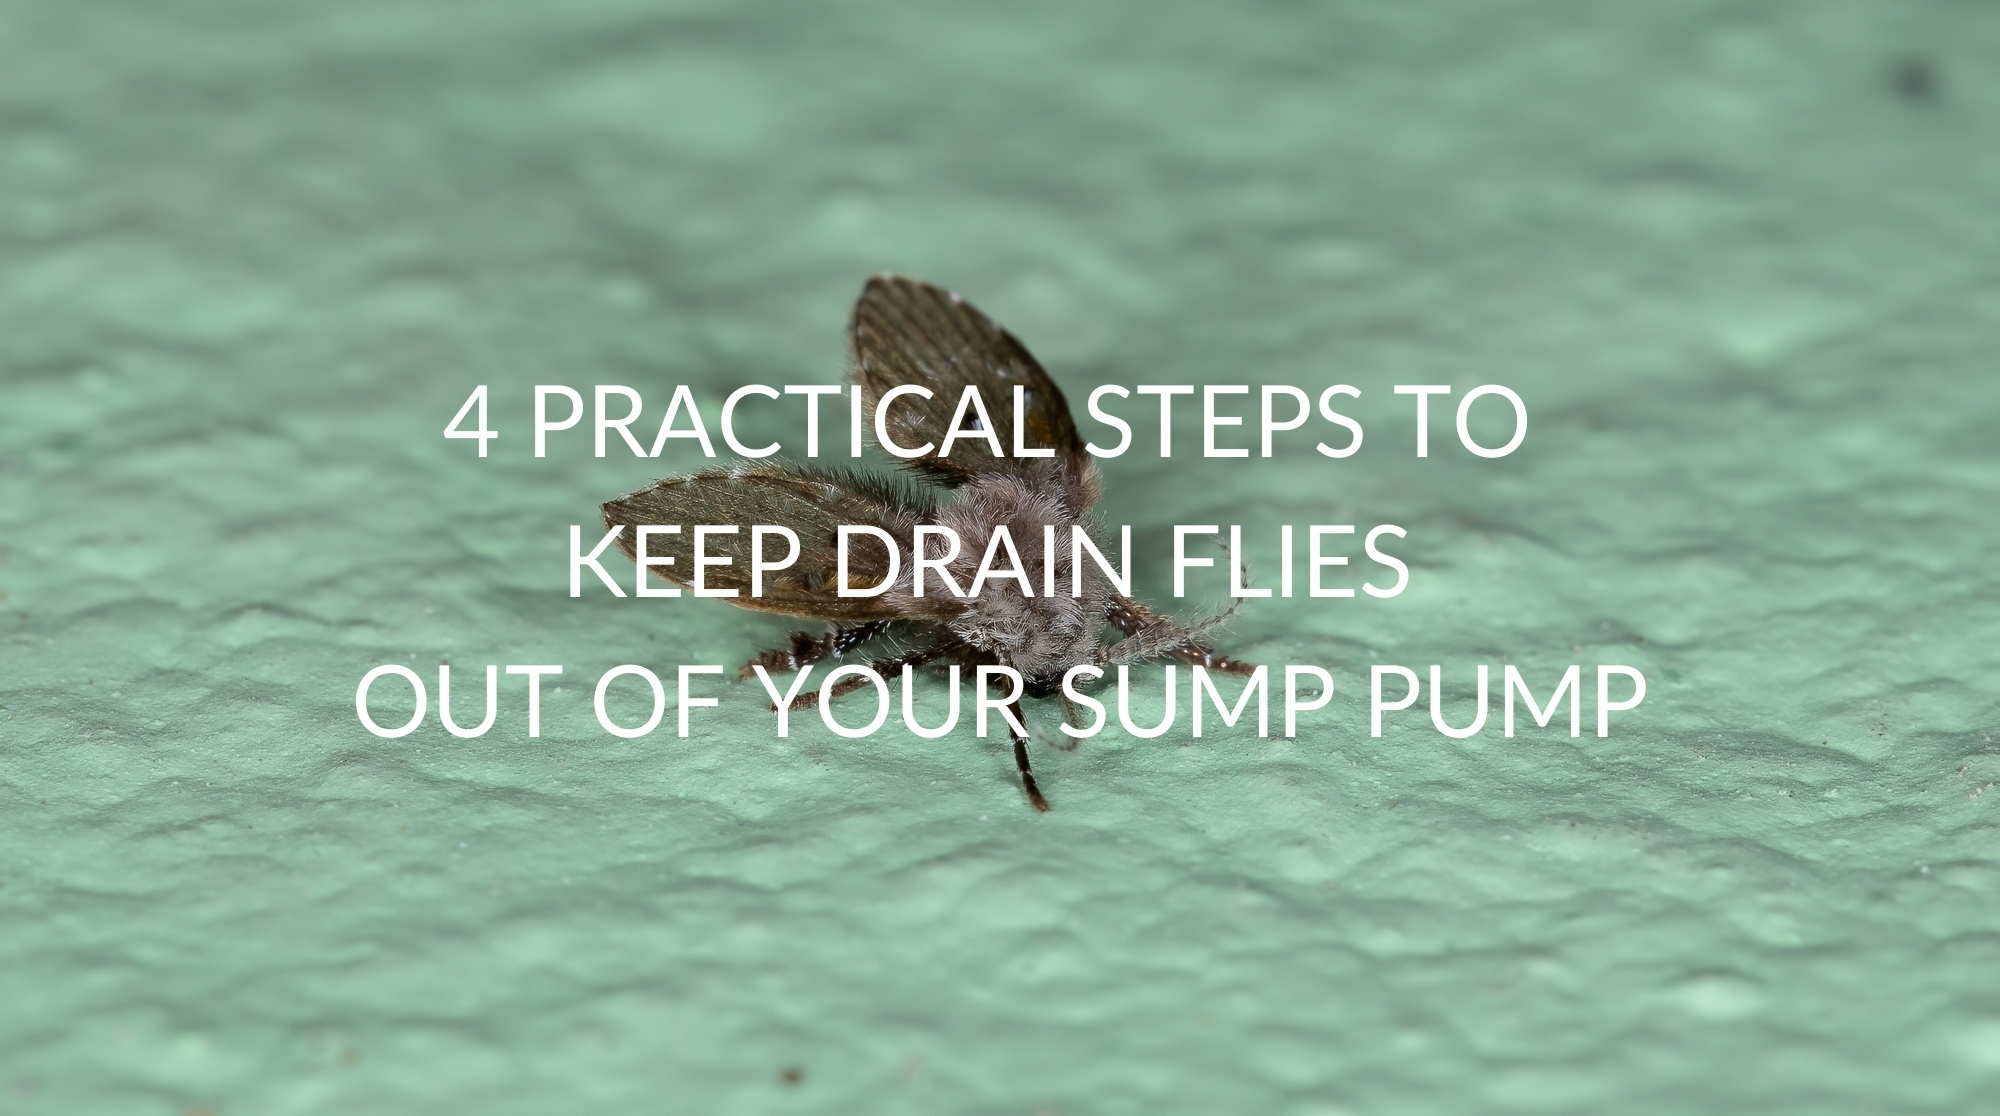 4 Practical Steps To Keep Drain Flies Out Of Your Sump Pump